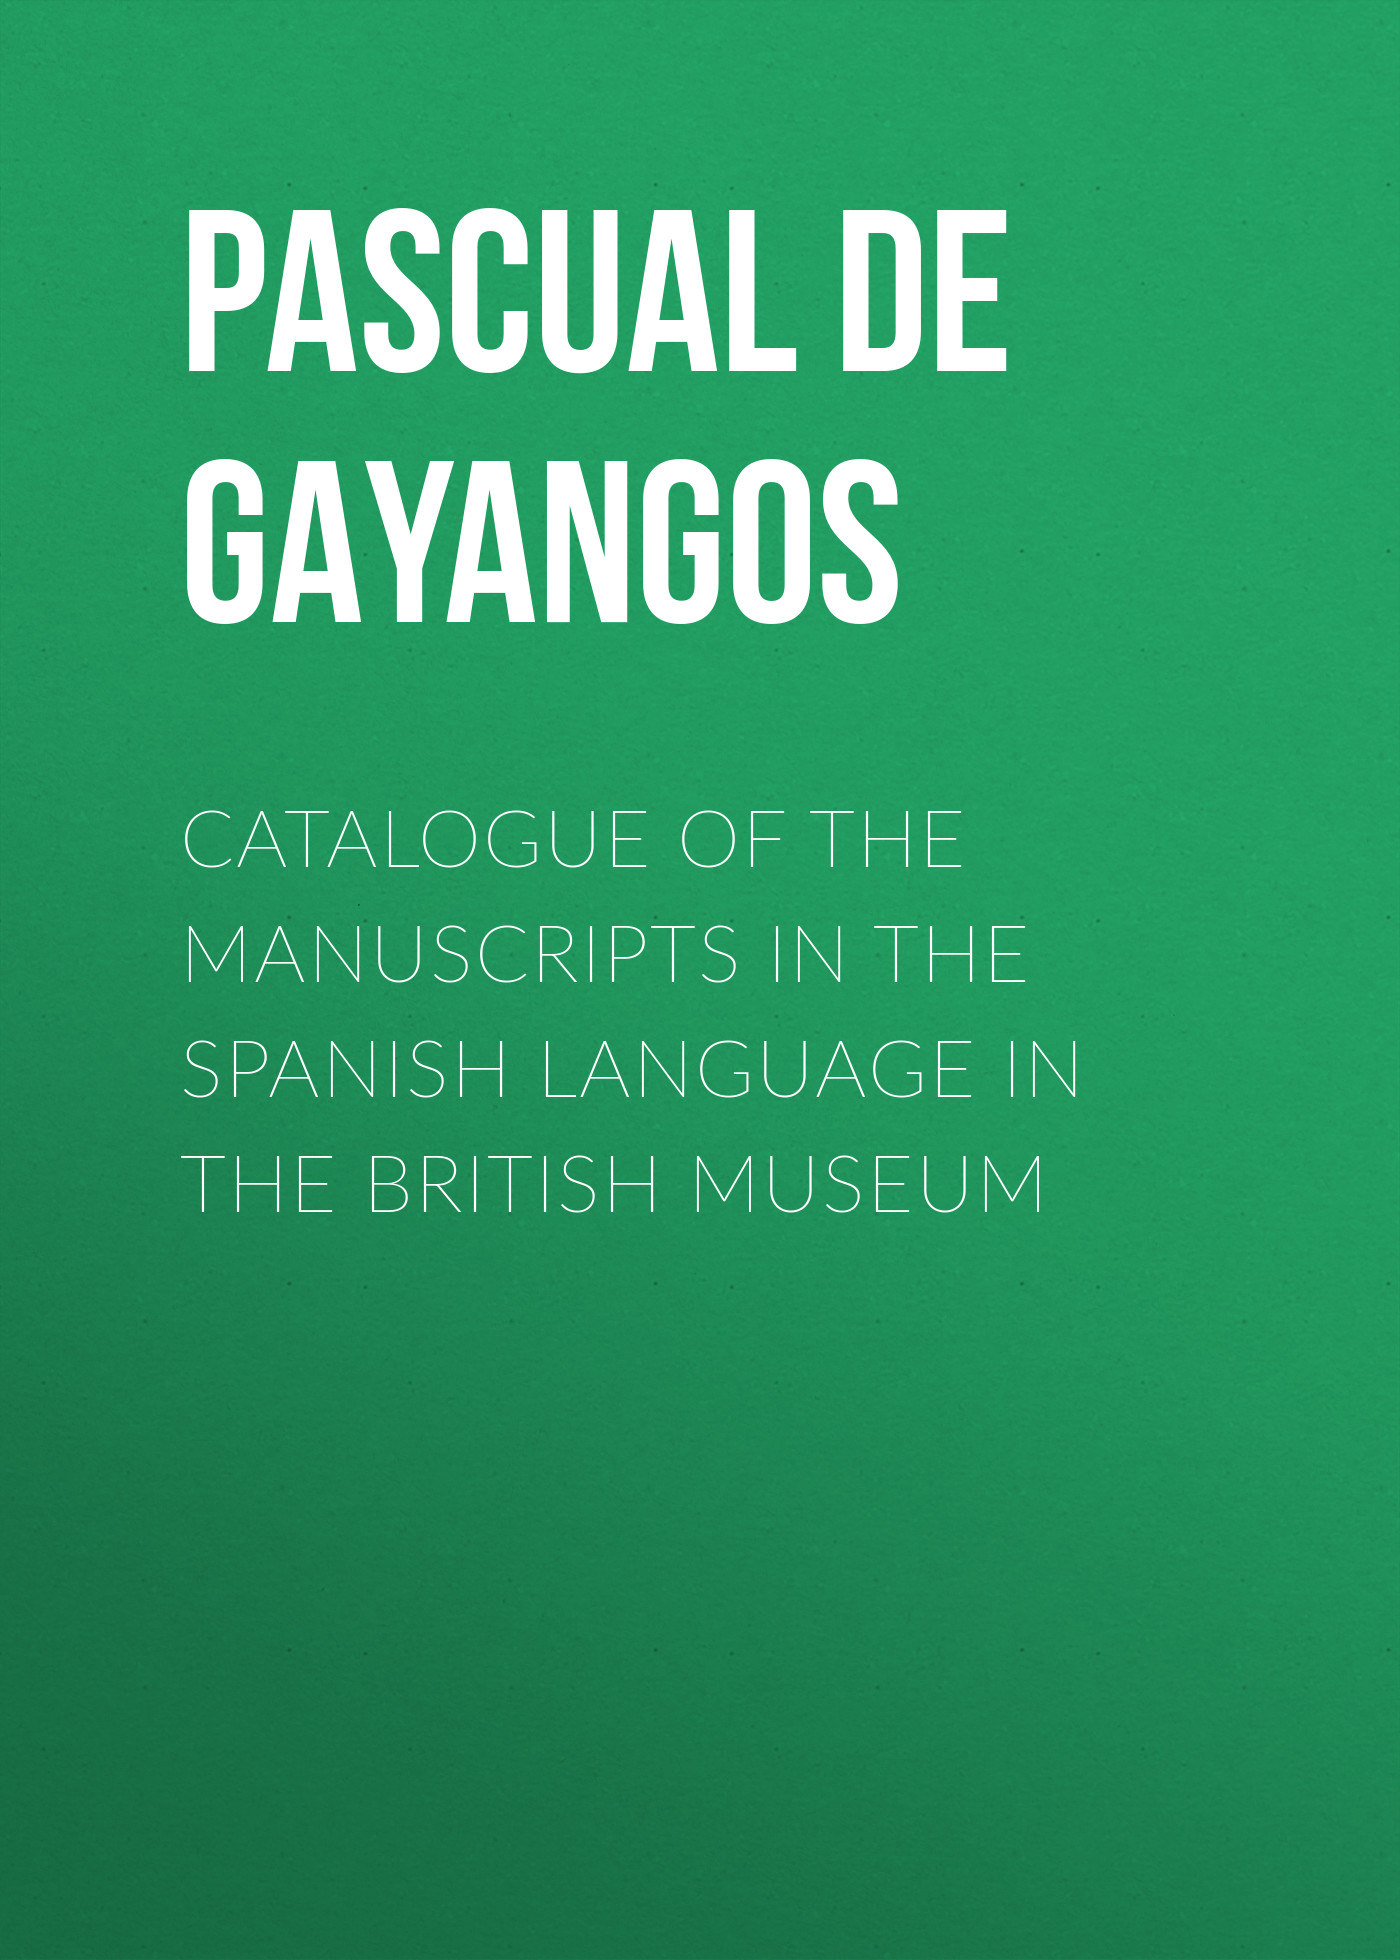 Pascual de Gayangos Catalogue of the Manuscripts in the Spanish Language in the British Museum